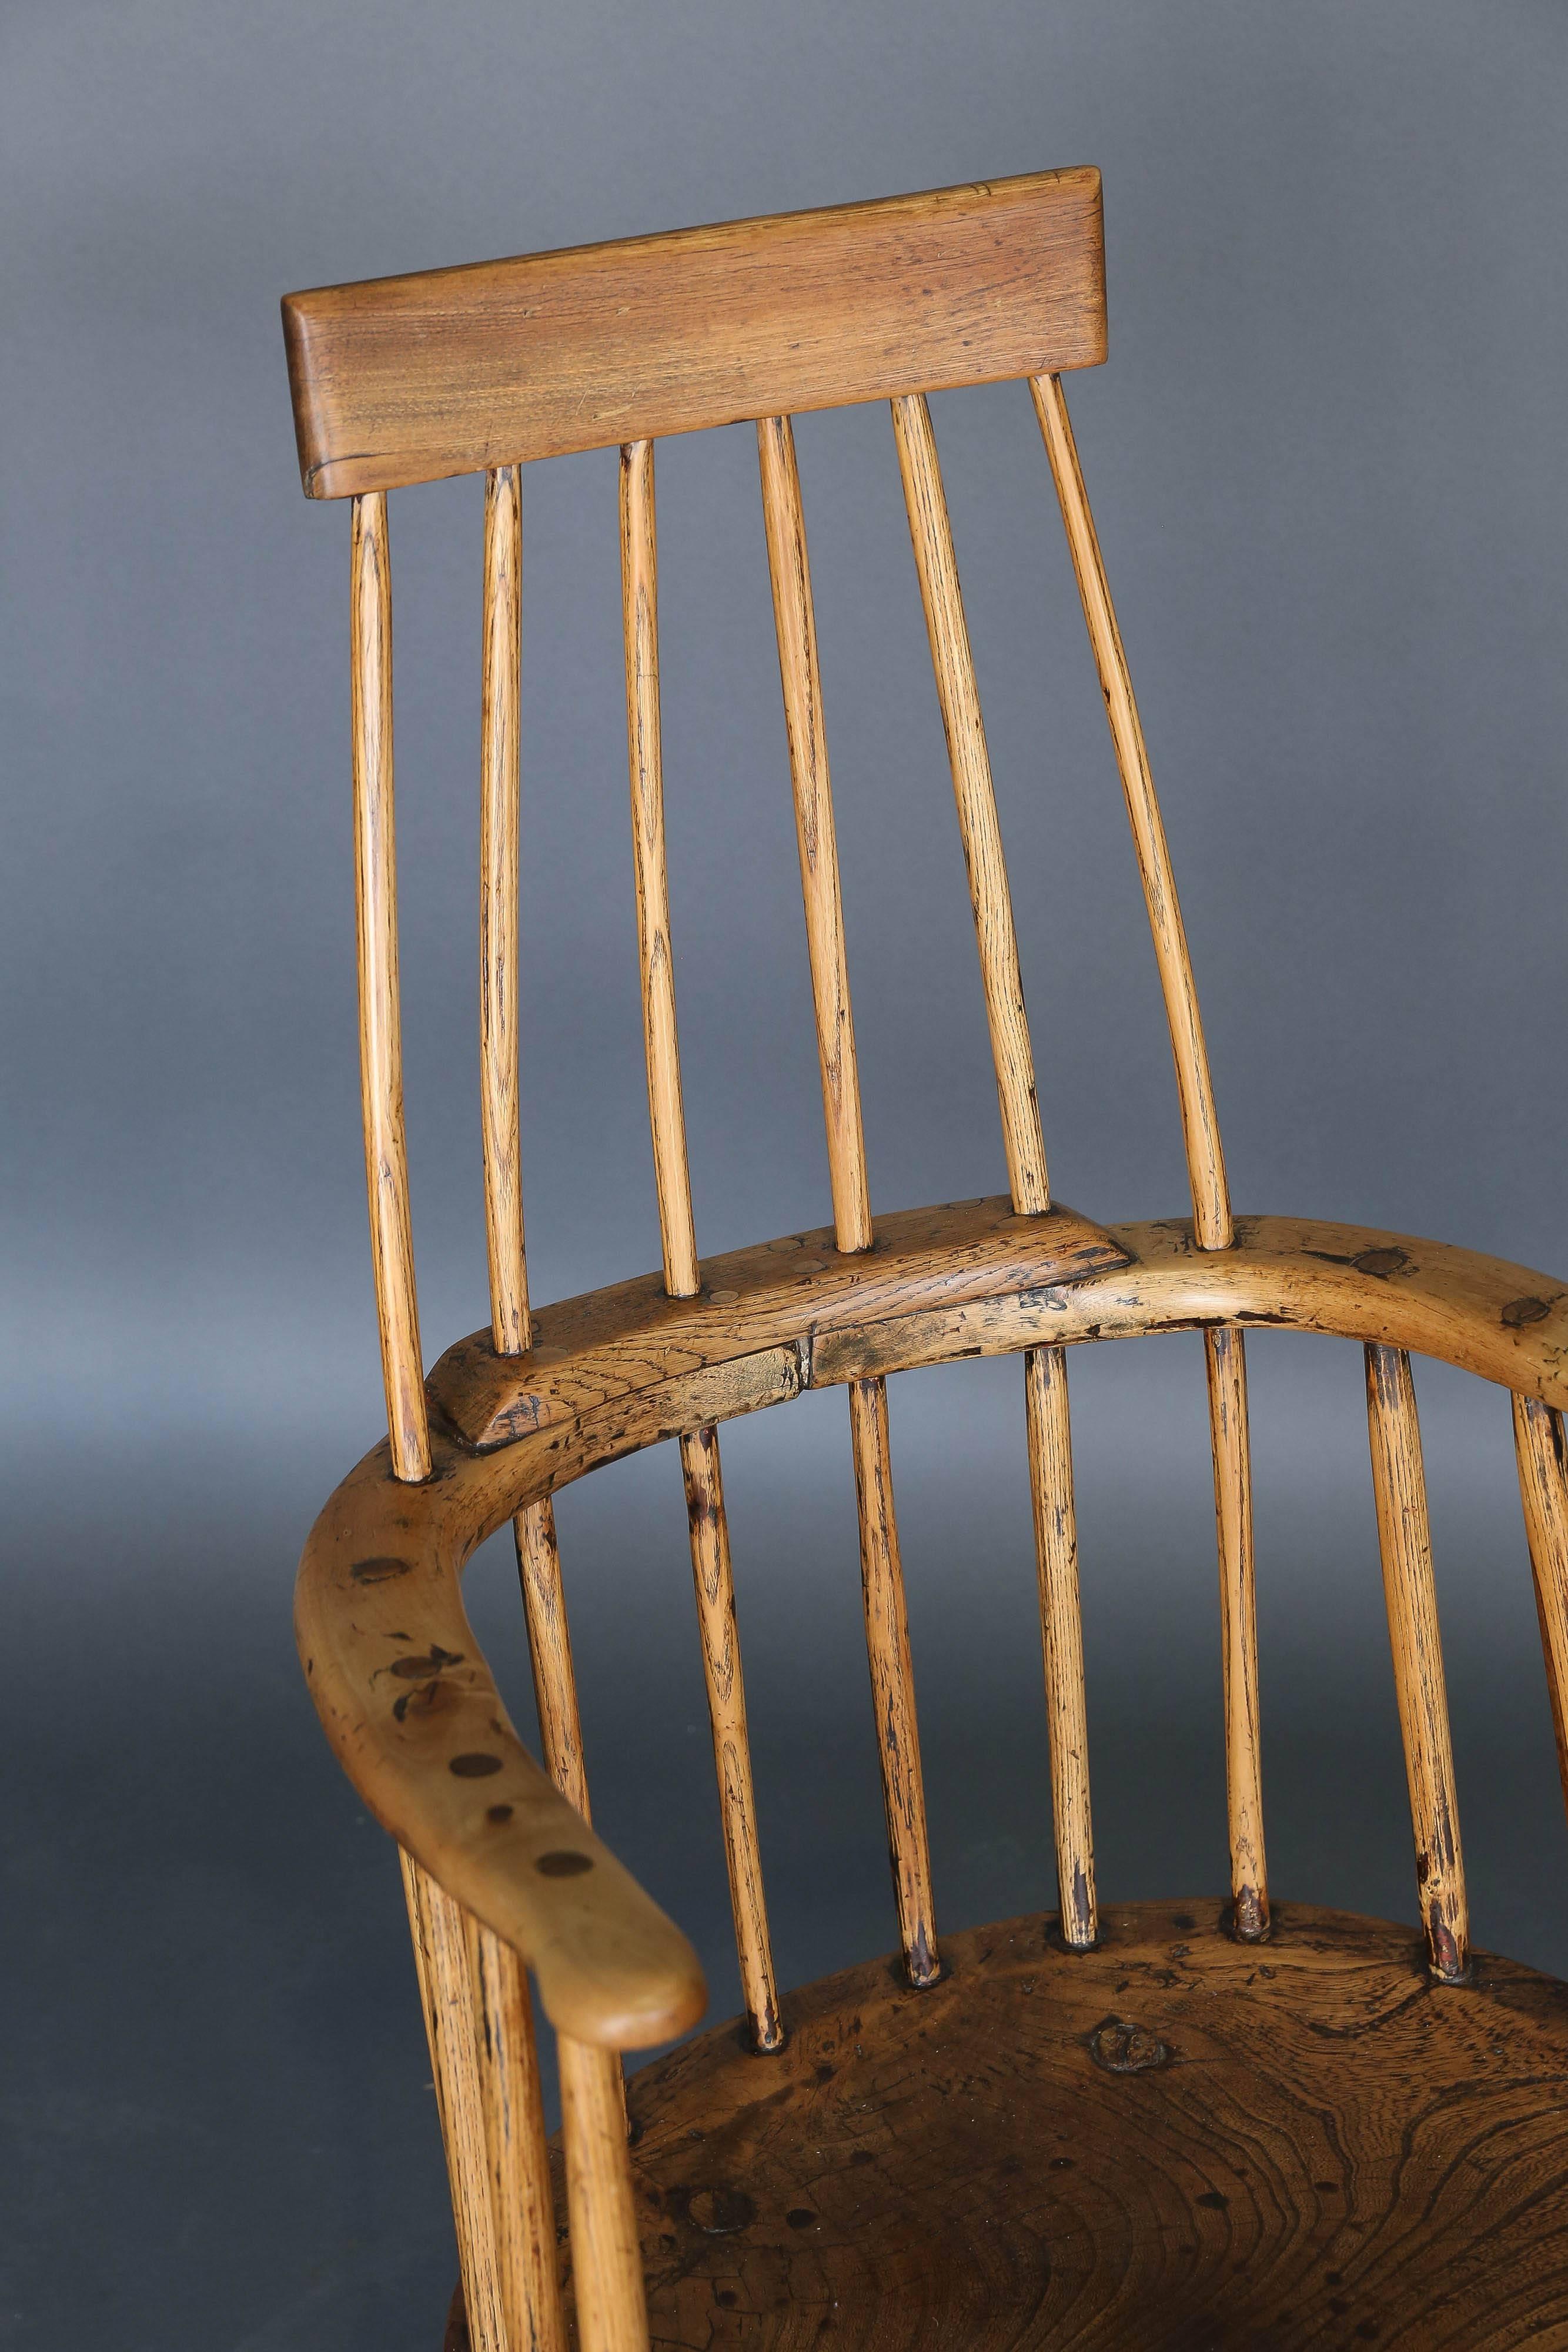 A Welsh Primitive comb-back stick chair. Very thick seat, handmade spindles. Elm and ash. Wonderful patina, excellent condition. Seat height is 13.5